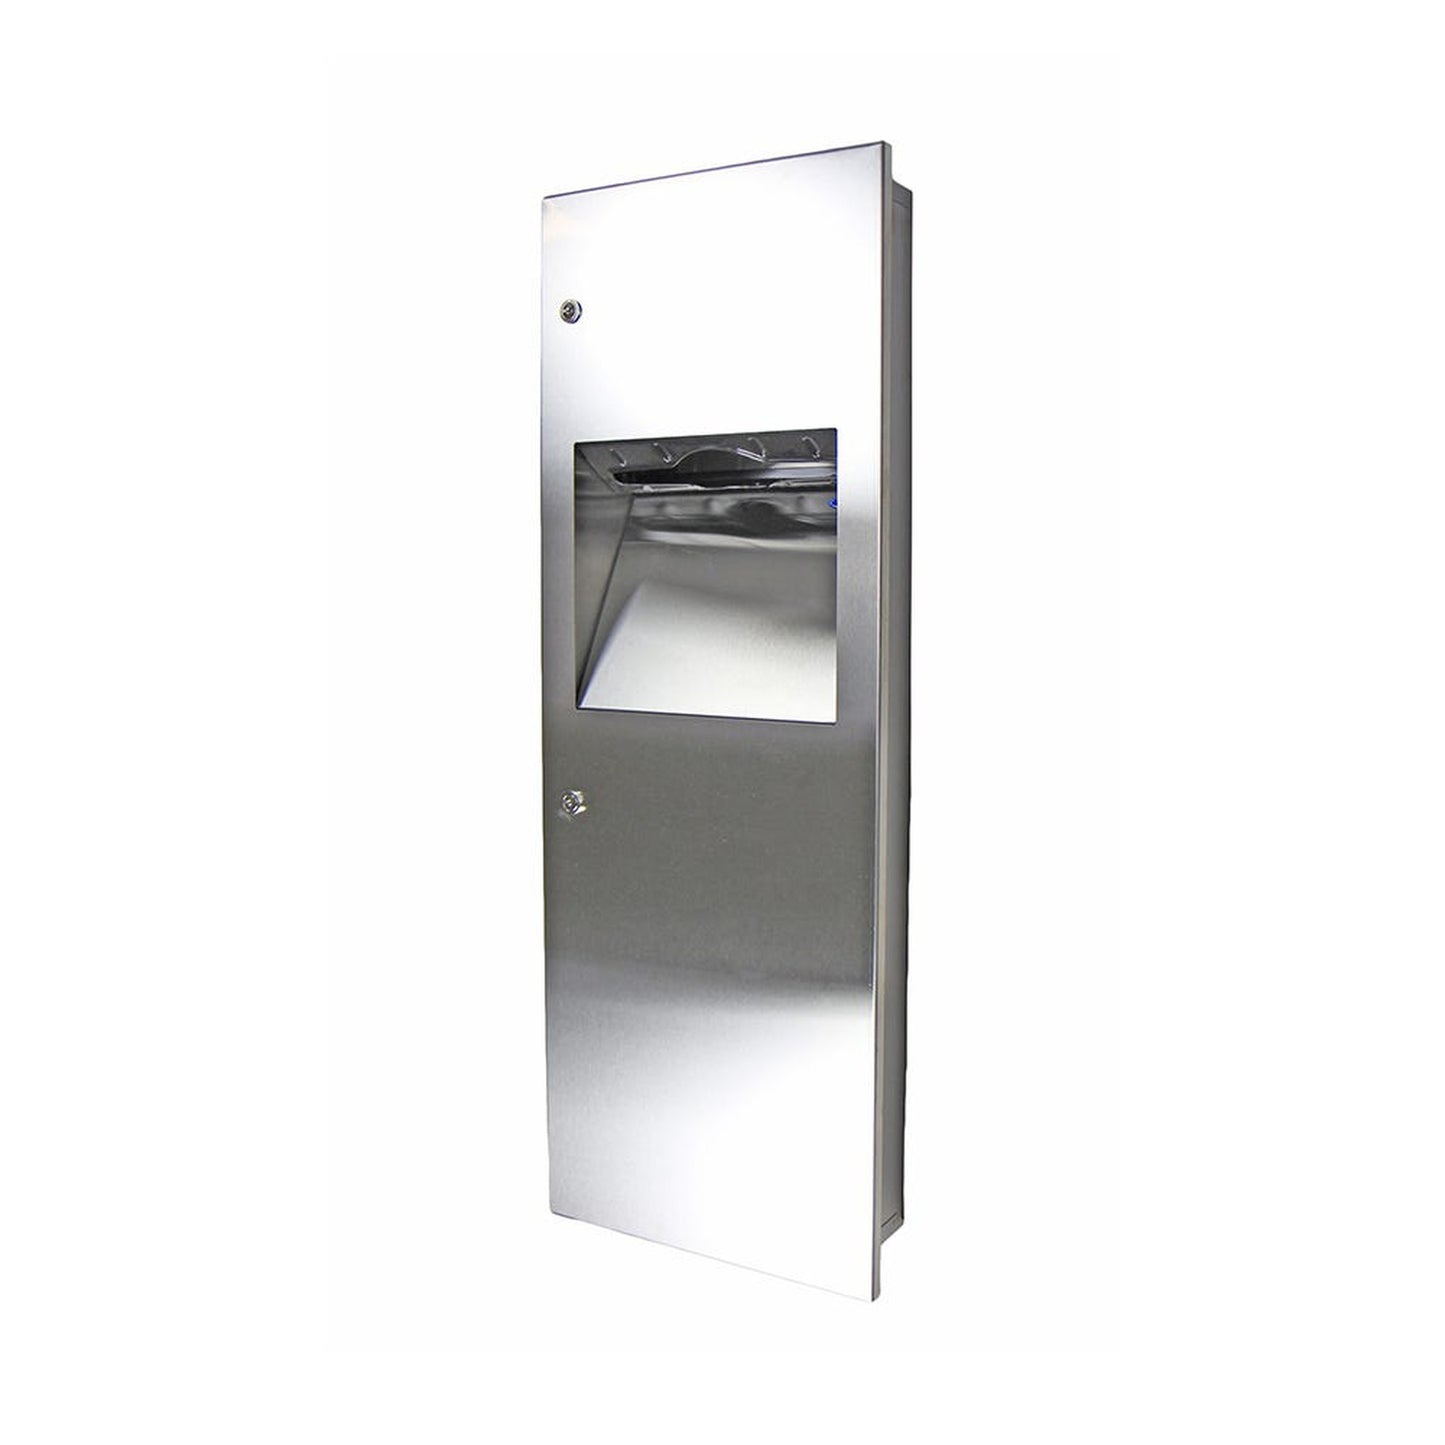 Frost 410-14-A Recessed Stainless Steel Paper Dispenser and Disposal